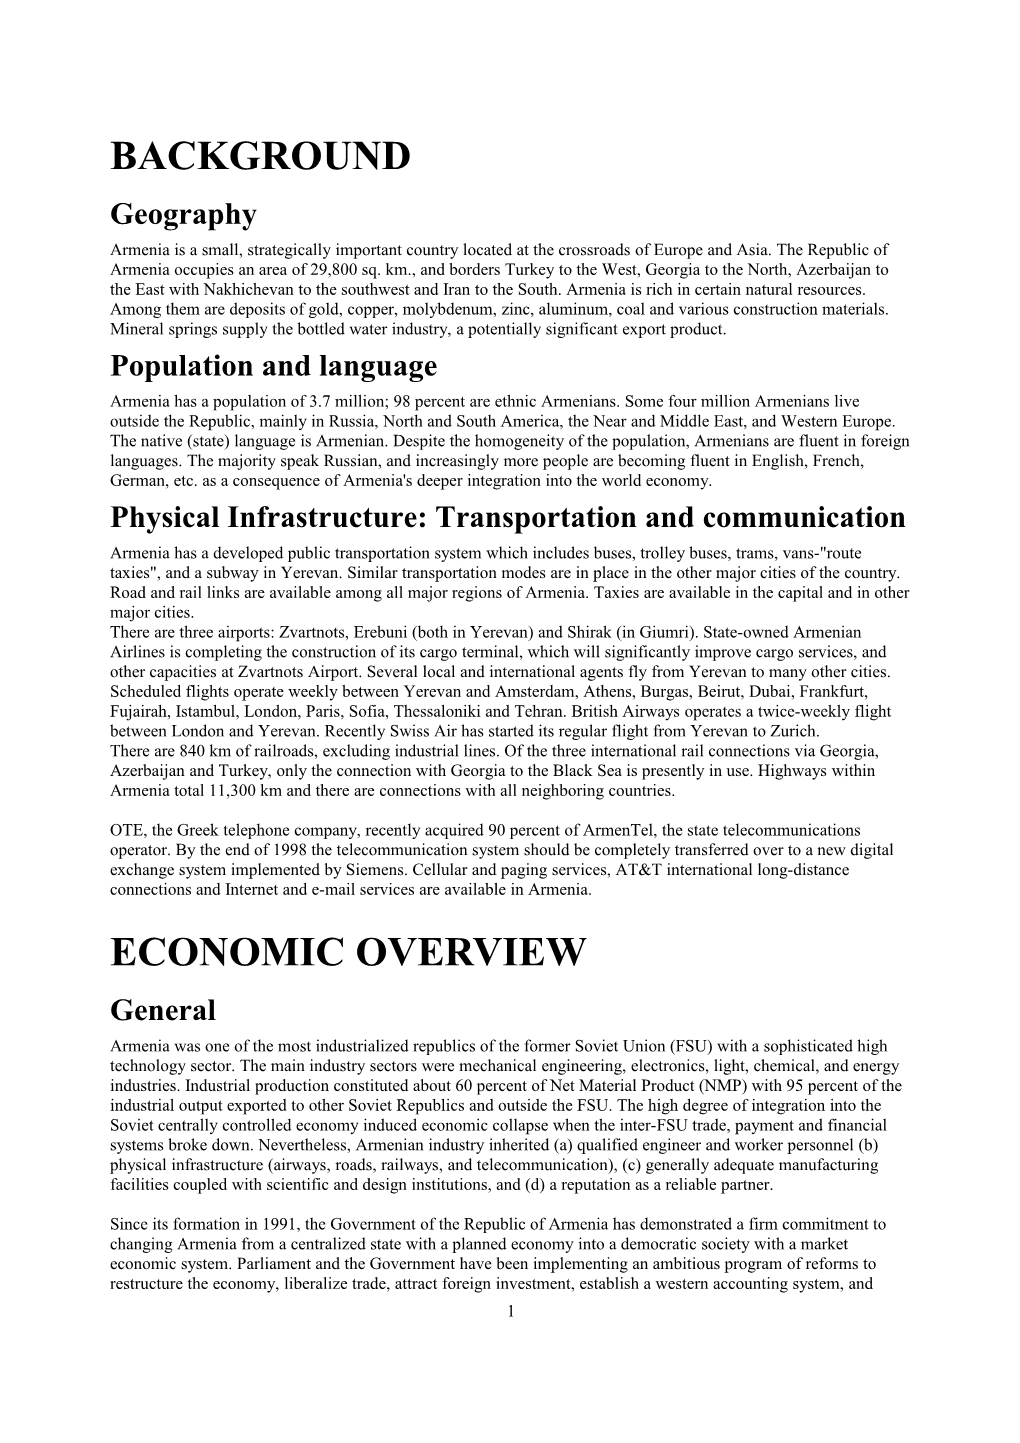 Physical Infrastructure: Transportation and Communication